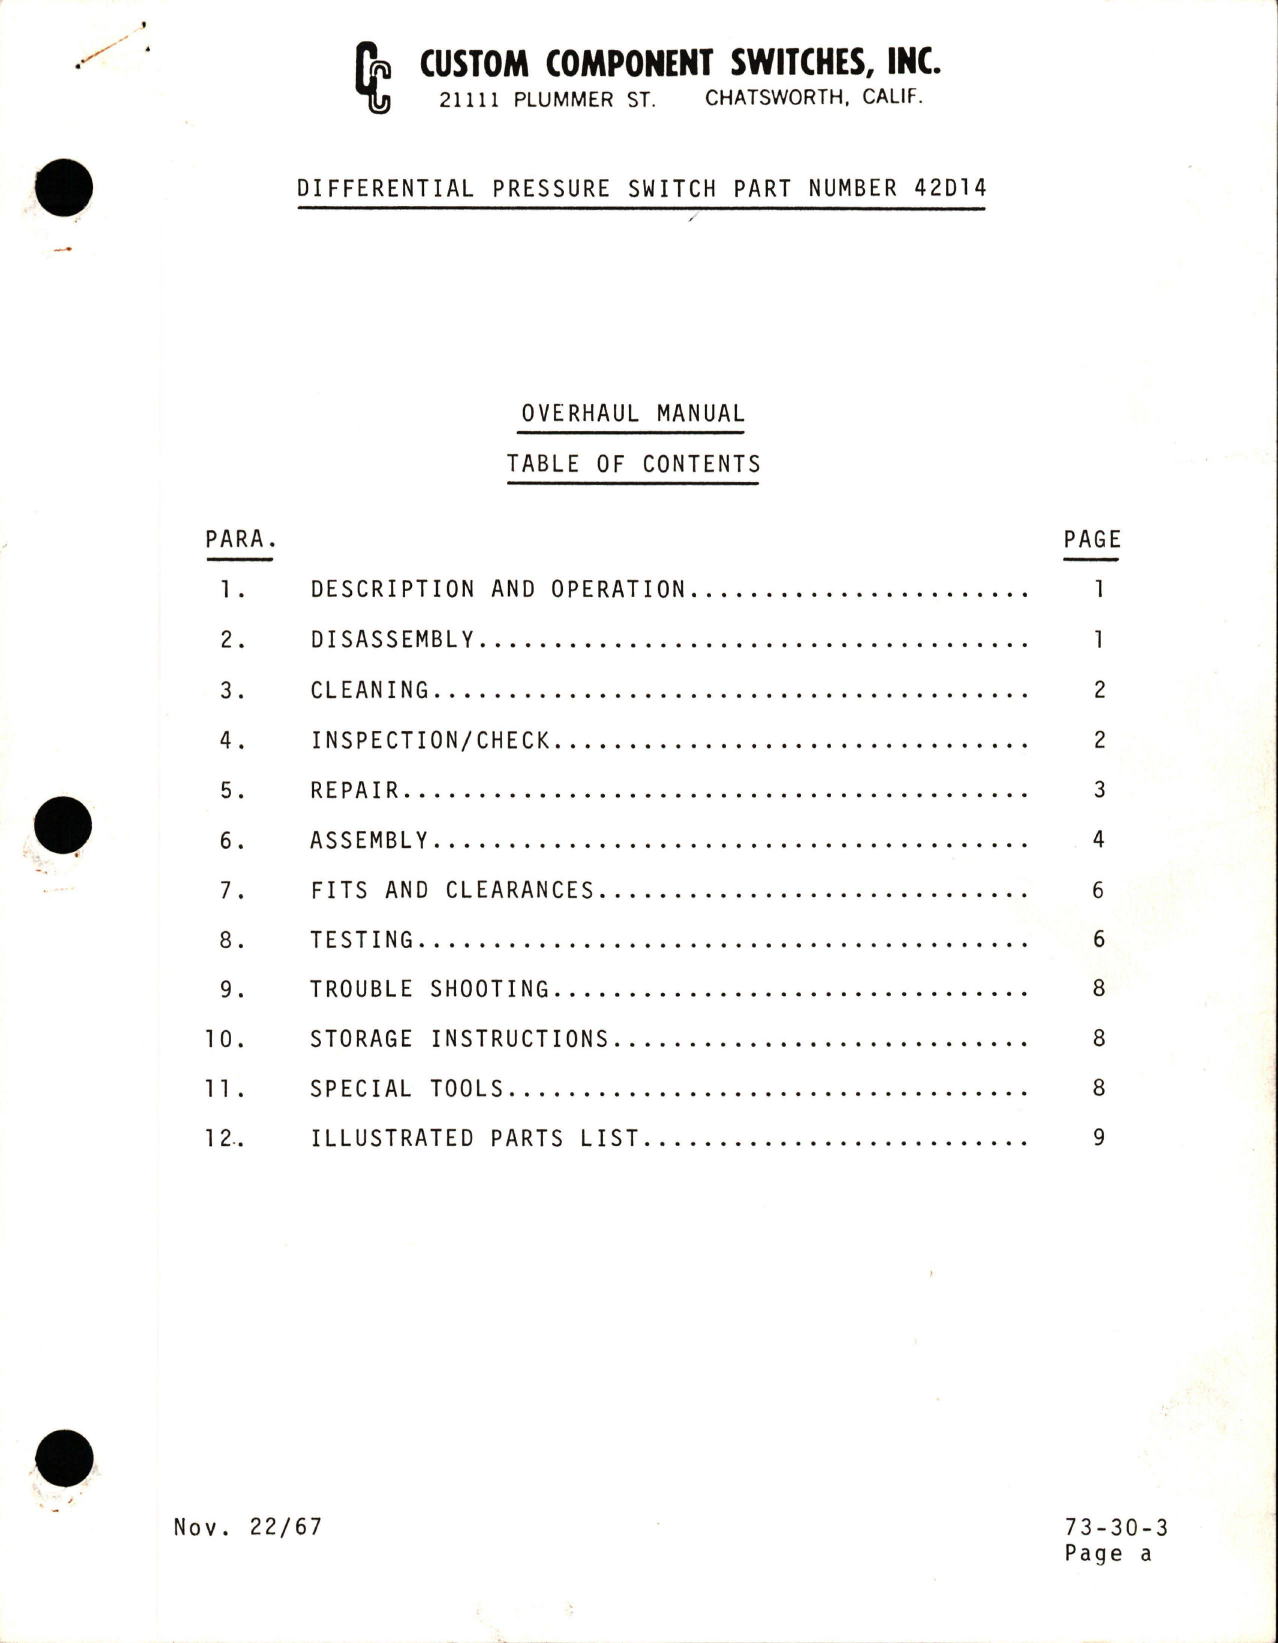 Sample page 1 from AirCorps Library document: Overhaul Manual for Differential Pressure Switch - Part 42D14 